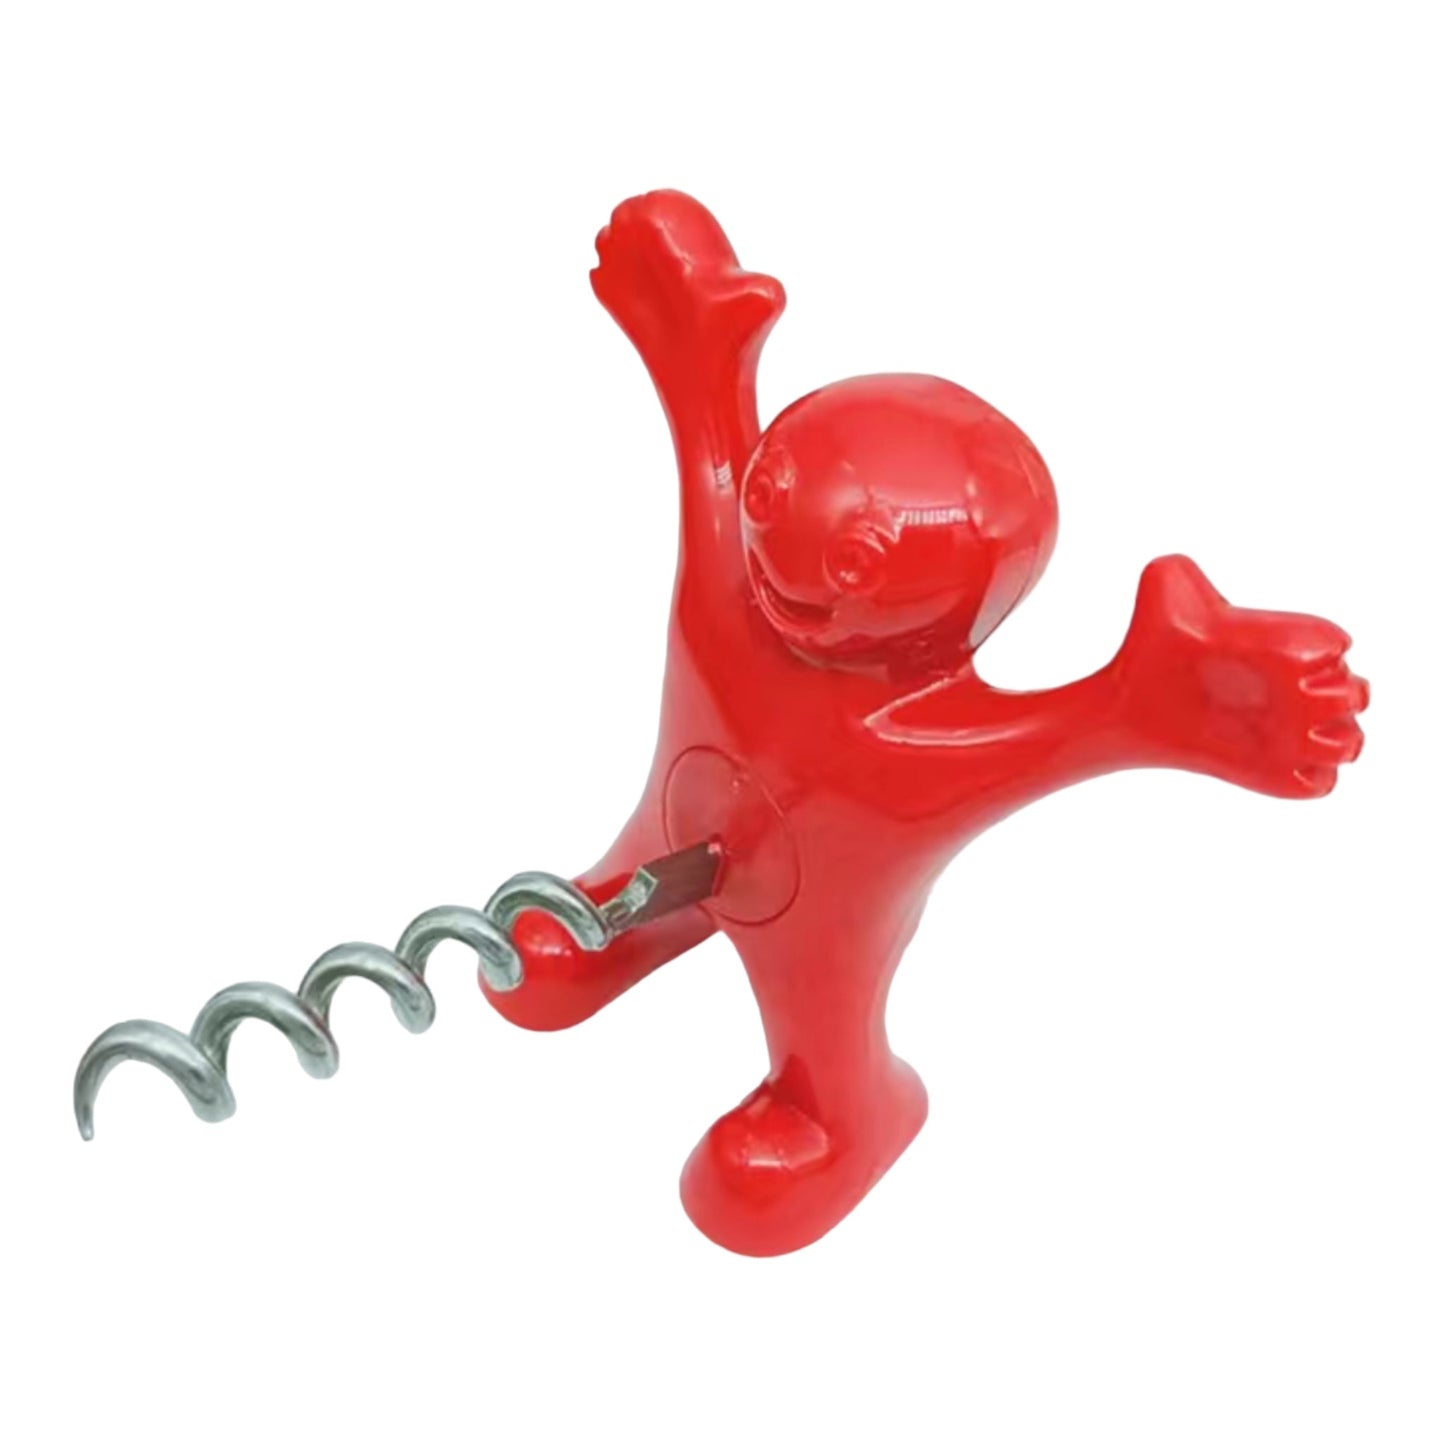 Man with Penis as Bottle Opener - 3 Models in Red